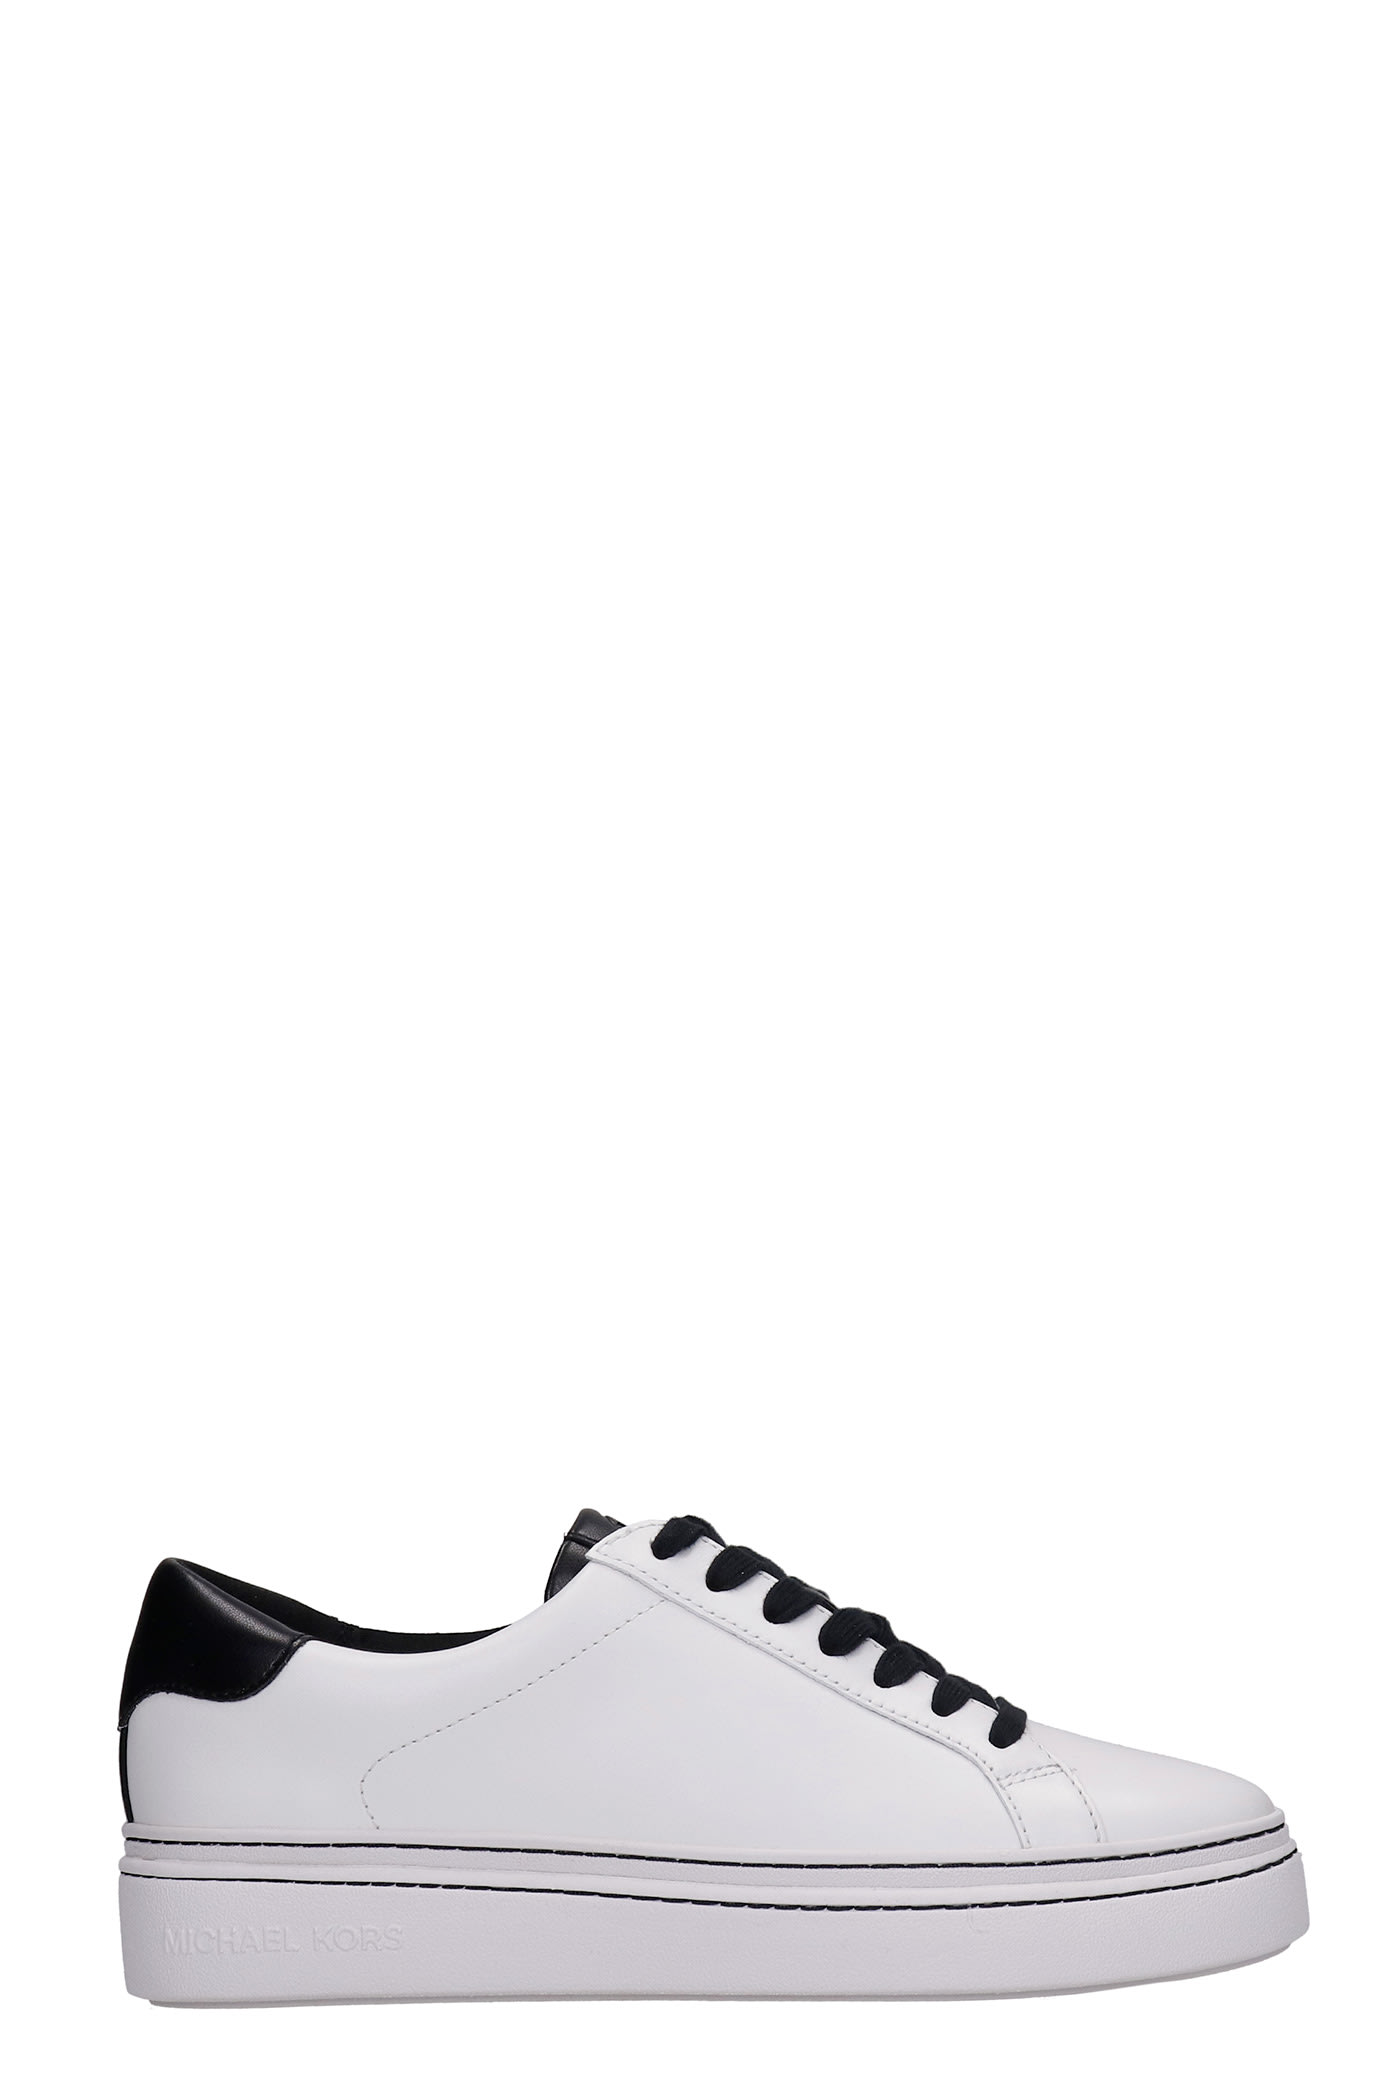 Buy Michael Kors Chapman Sneakers In White Leather online, shop Michael Kors shoes with free shipping